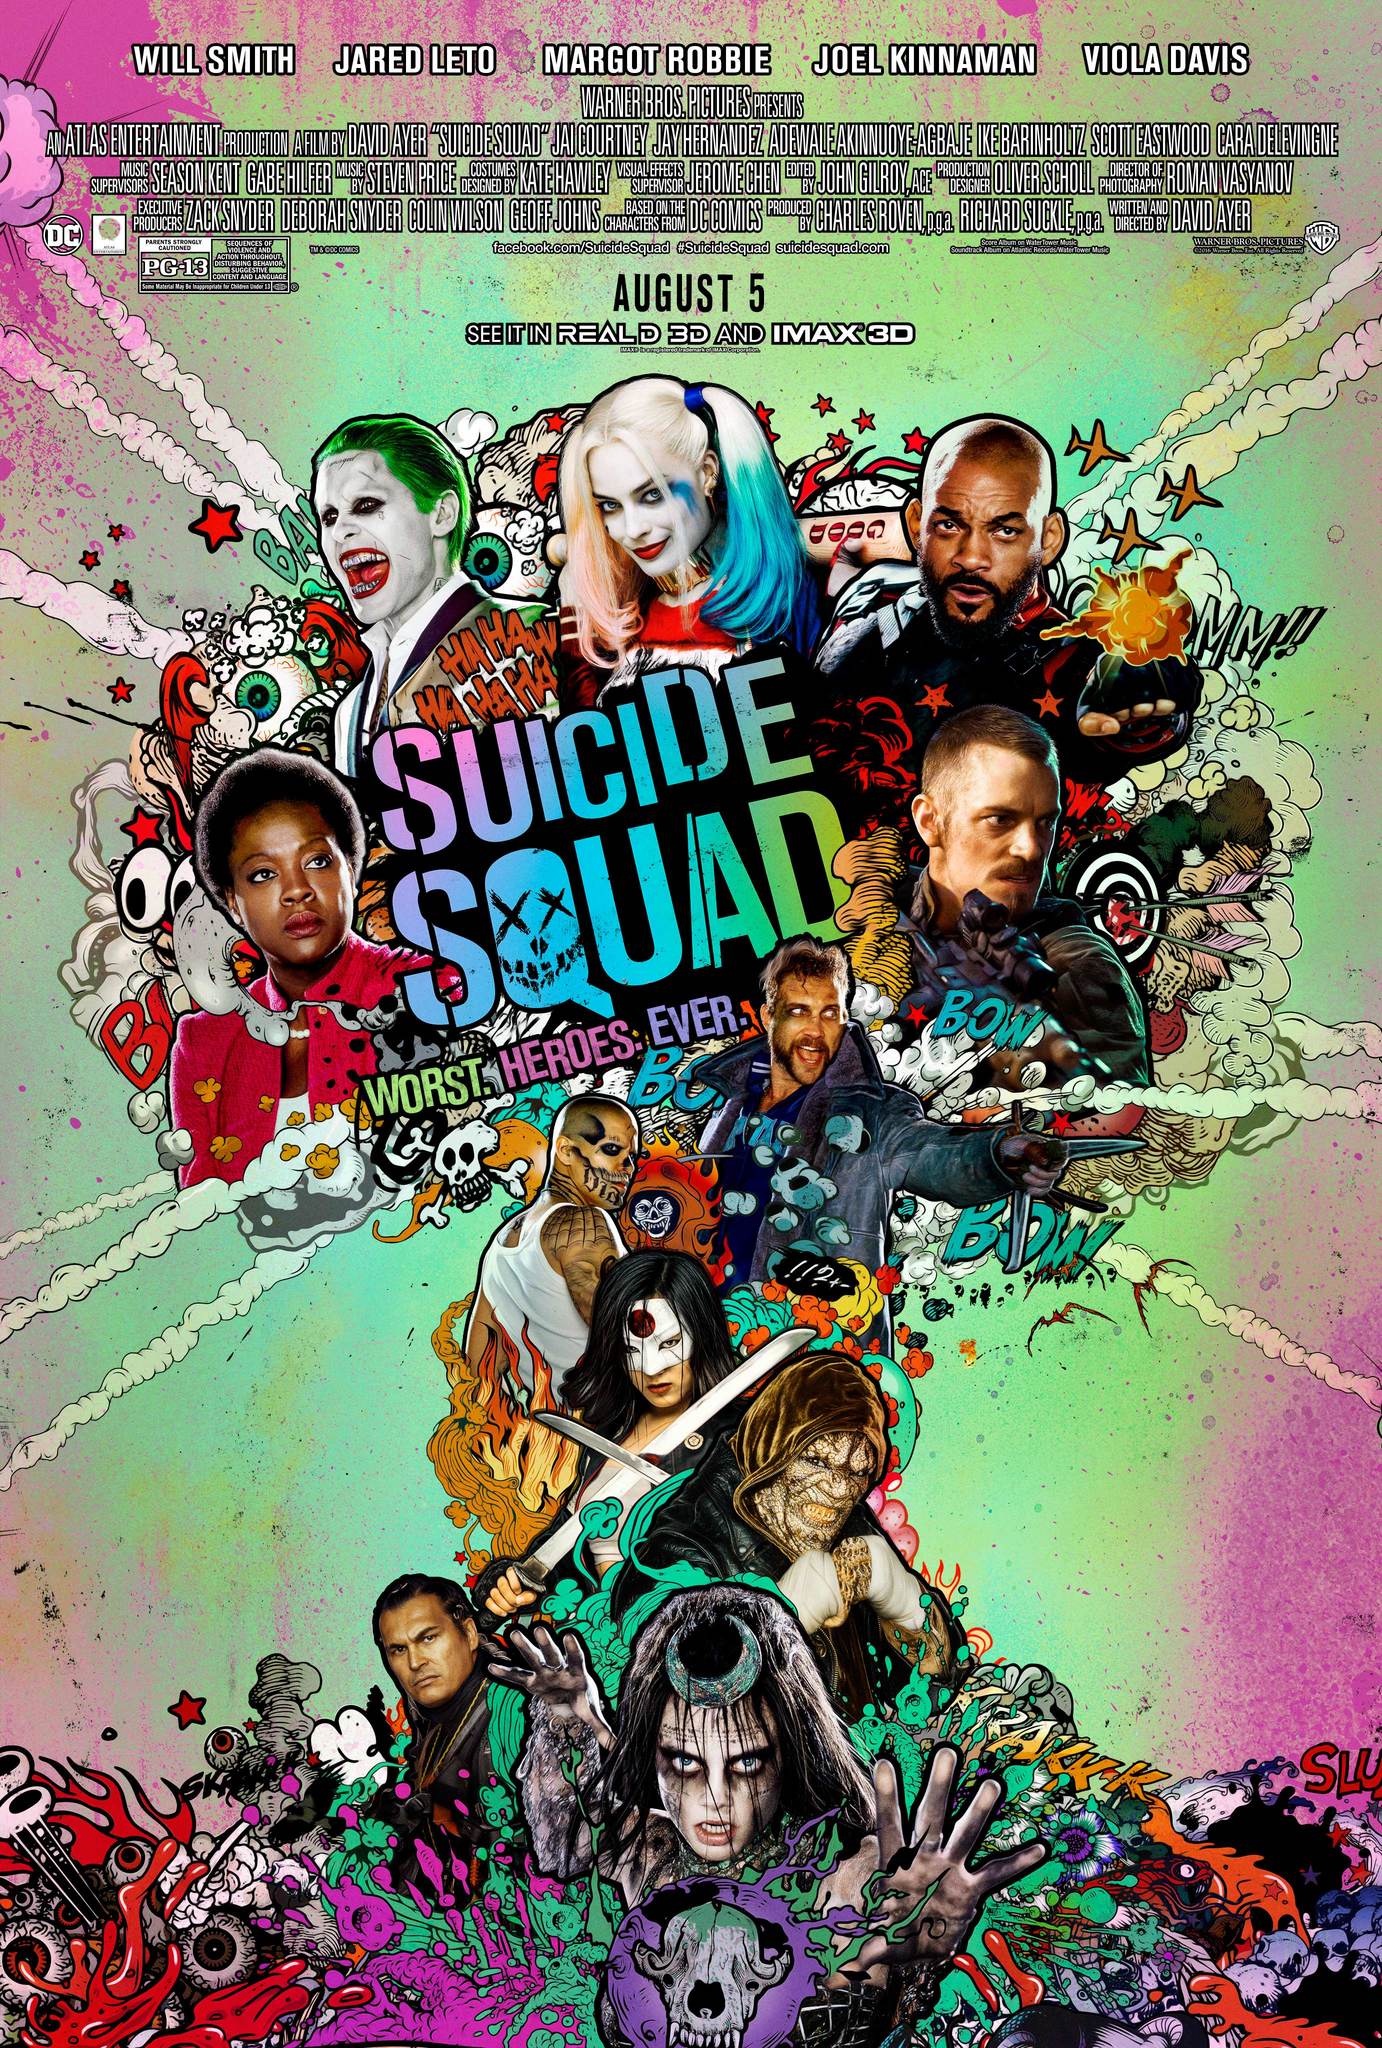 Poster for 'Suicide Squad' showcasing action previsualization developed by Ferdi Fischer with WarpCam® technology.